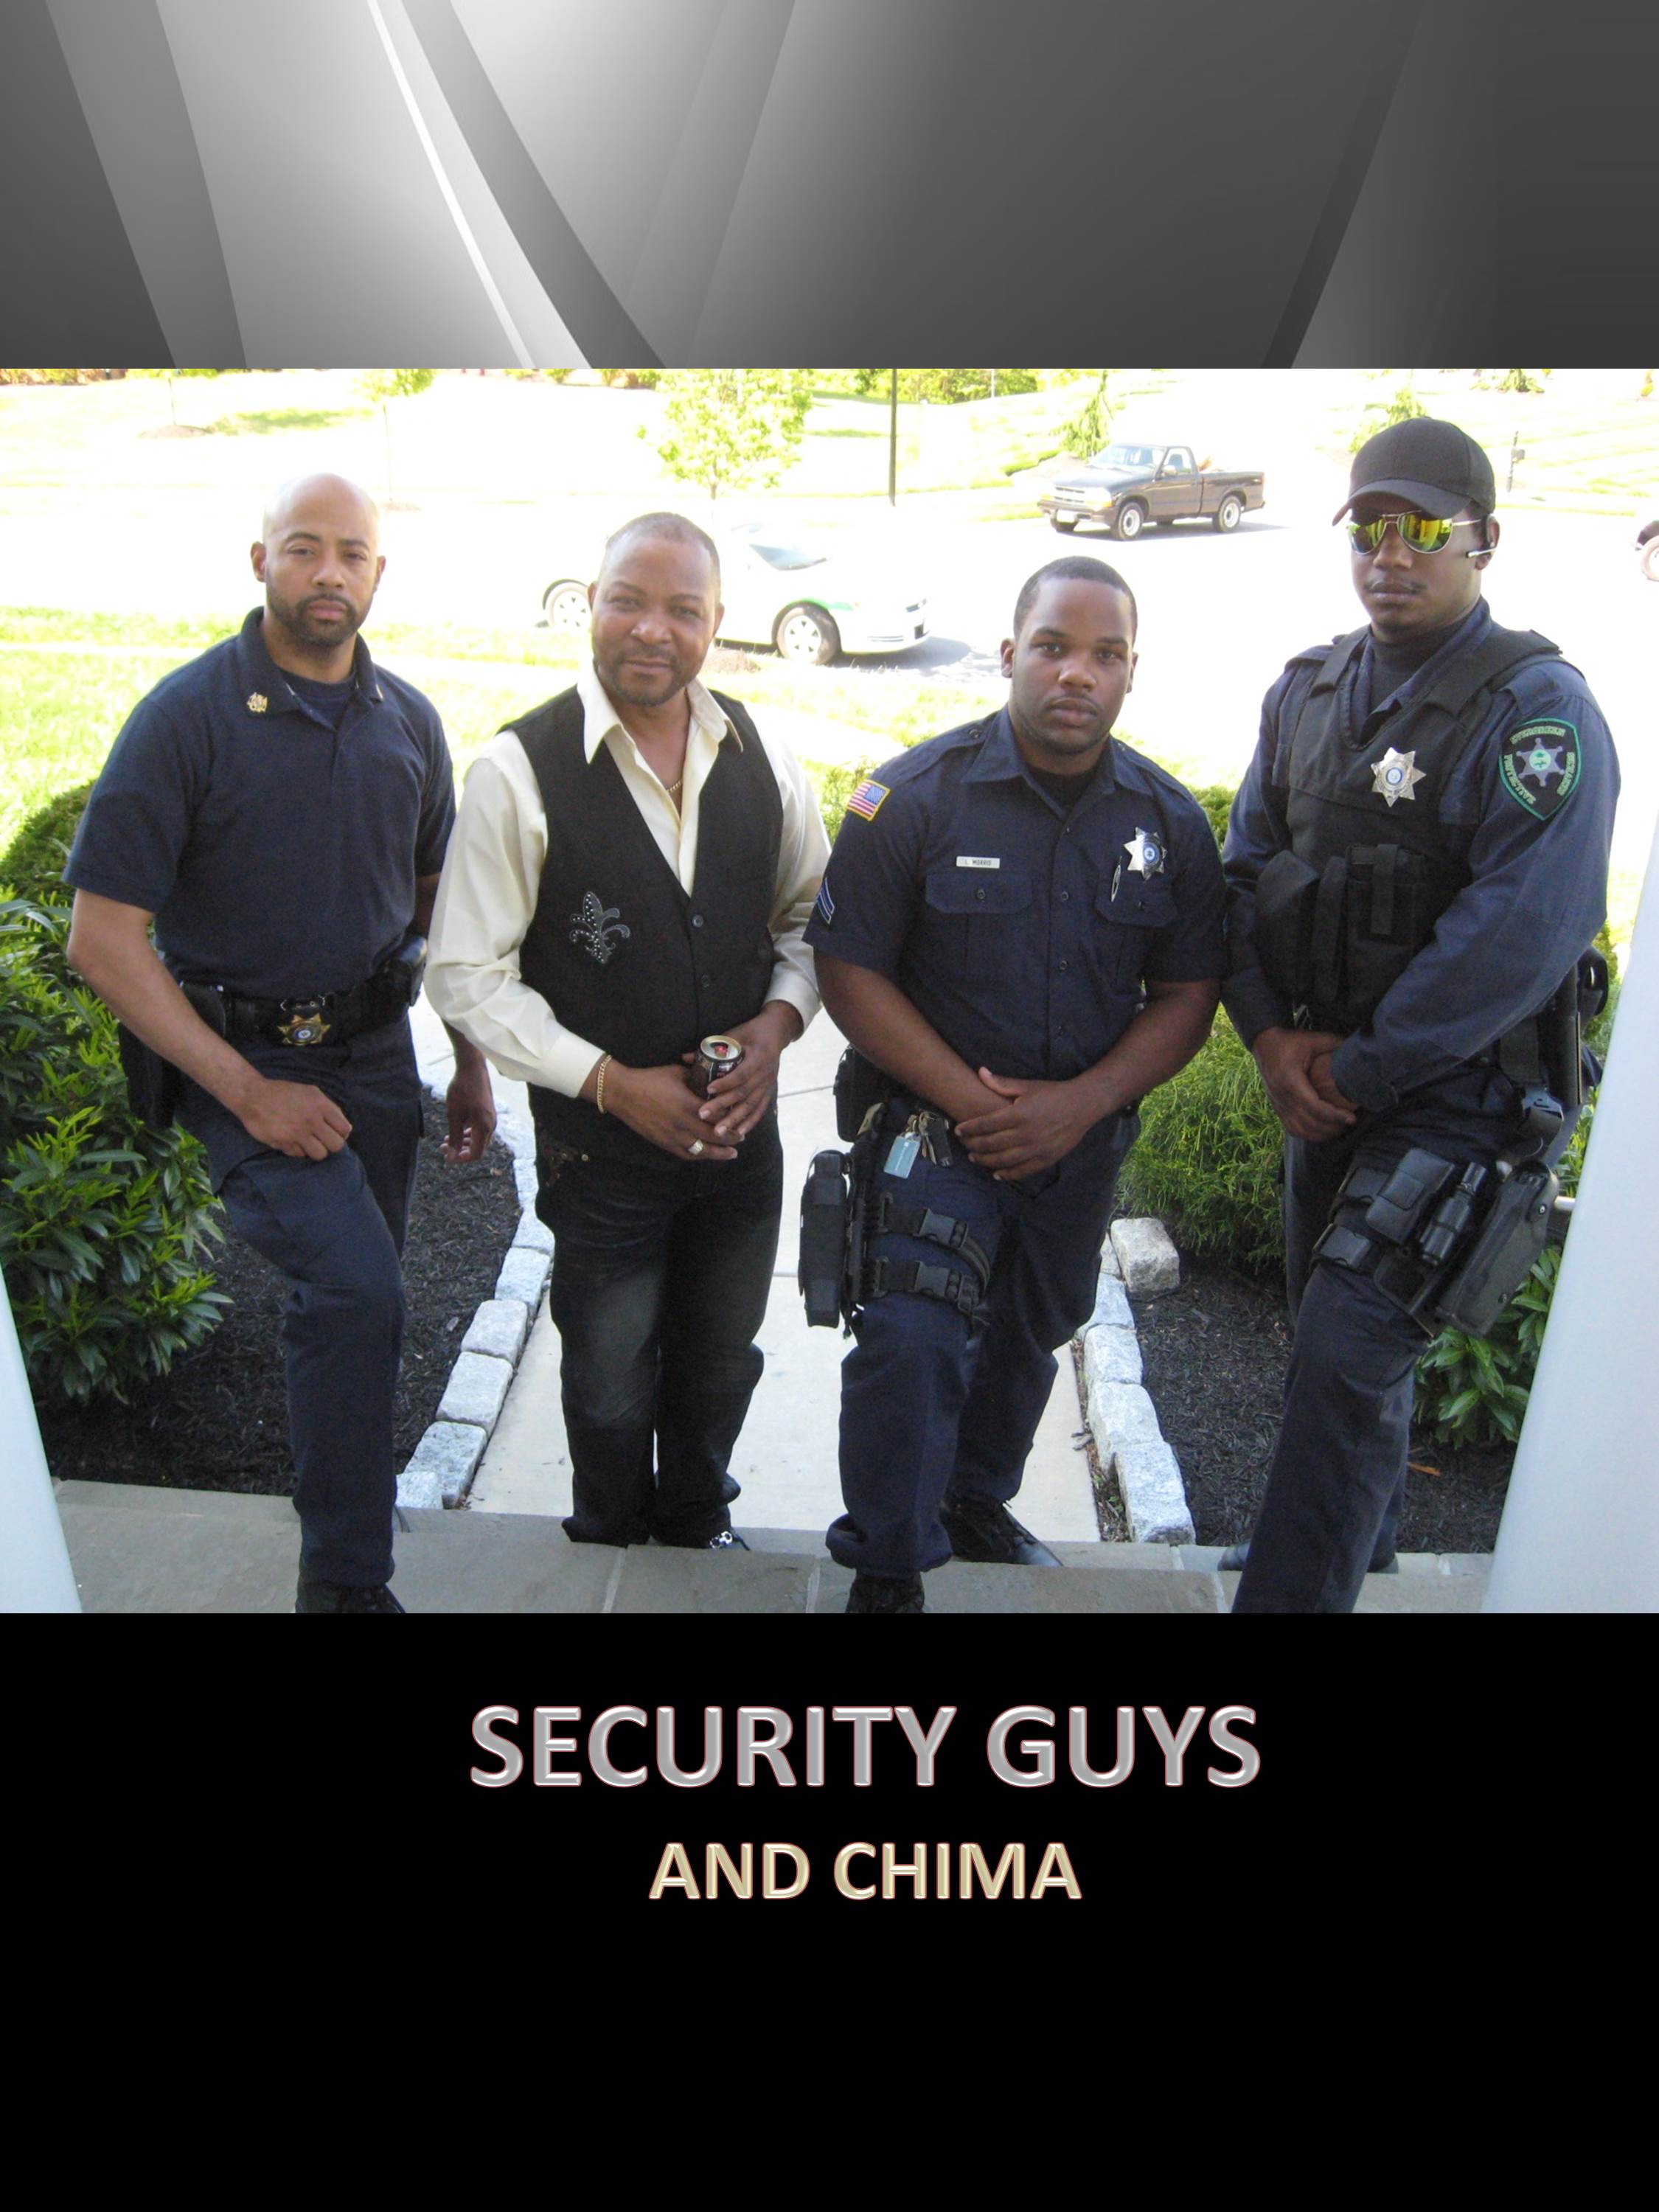 SECURITY GUYS AND CHIMA